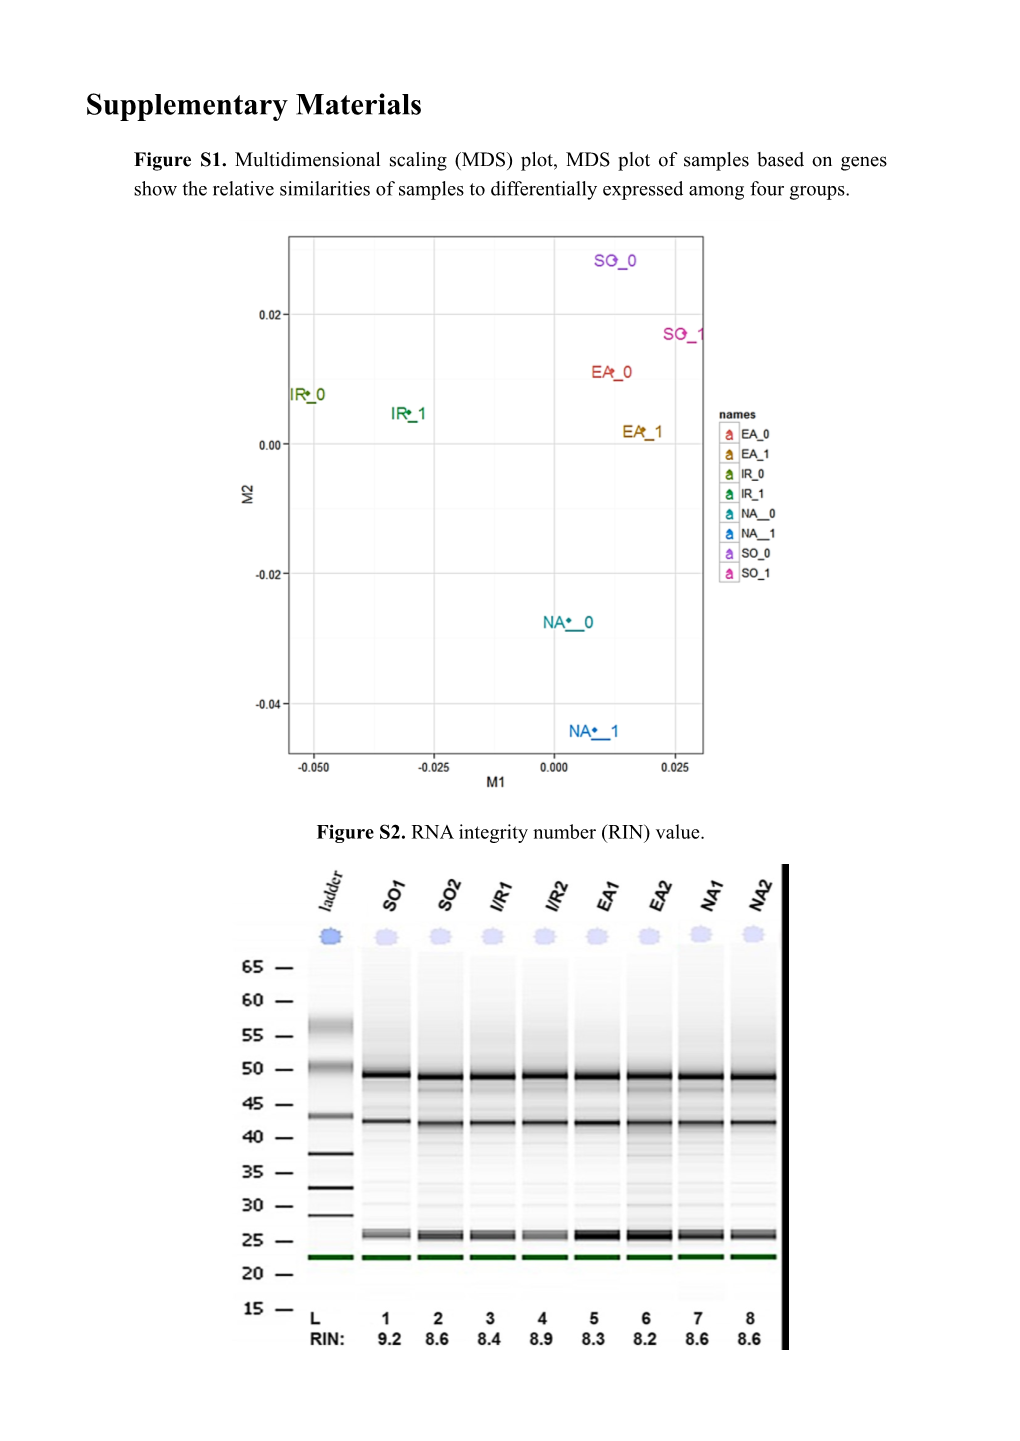 Supplementary File Figure S1. Multidimensional Scaling (MDS) Plot